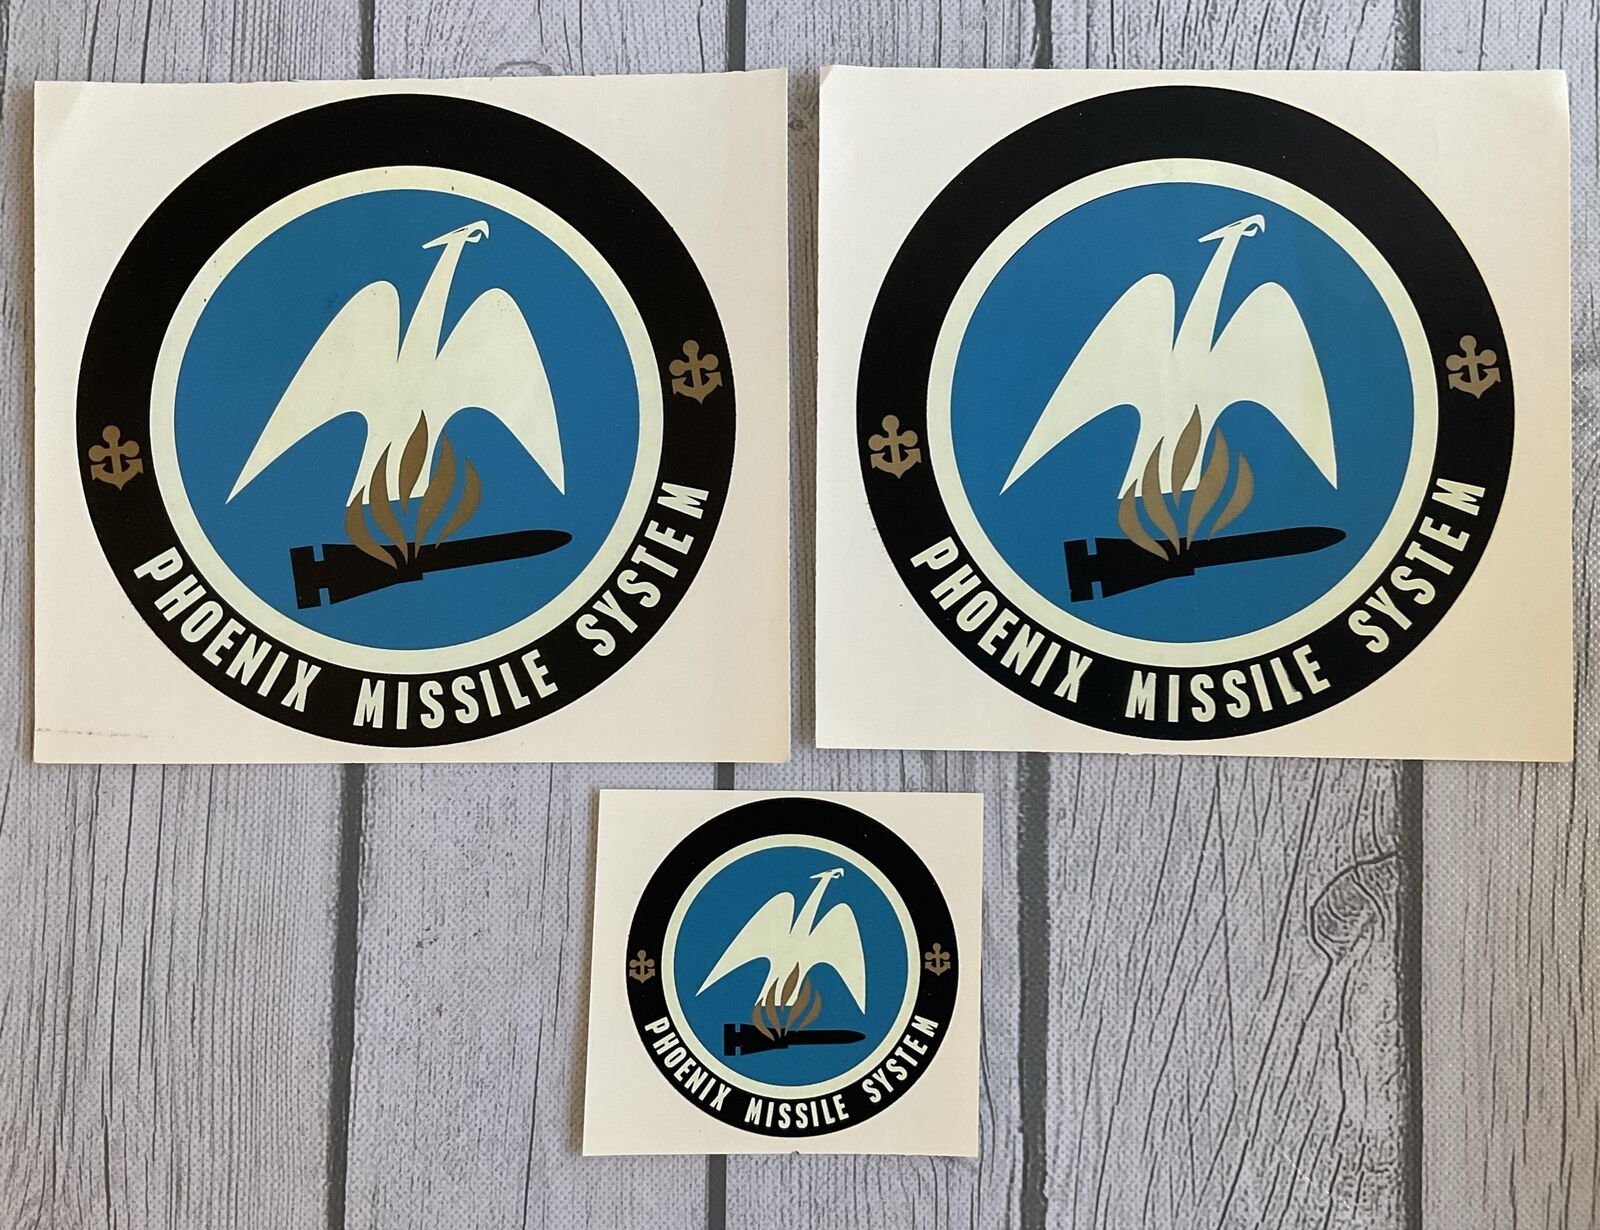 Vintage USA Navy Harpoon Phoenix Missile Systems Decals Set of 3